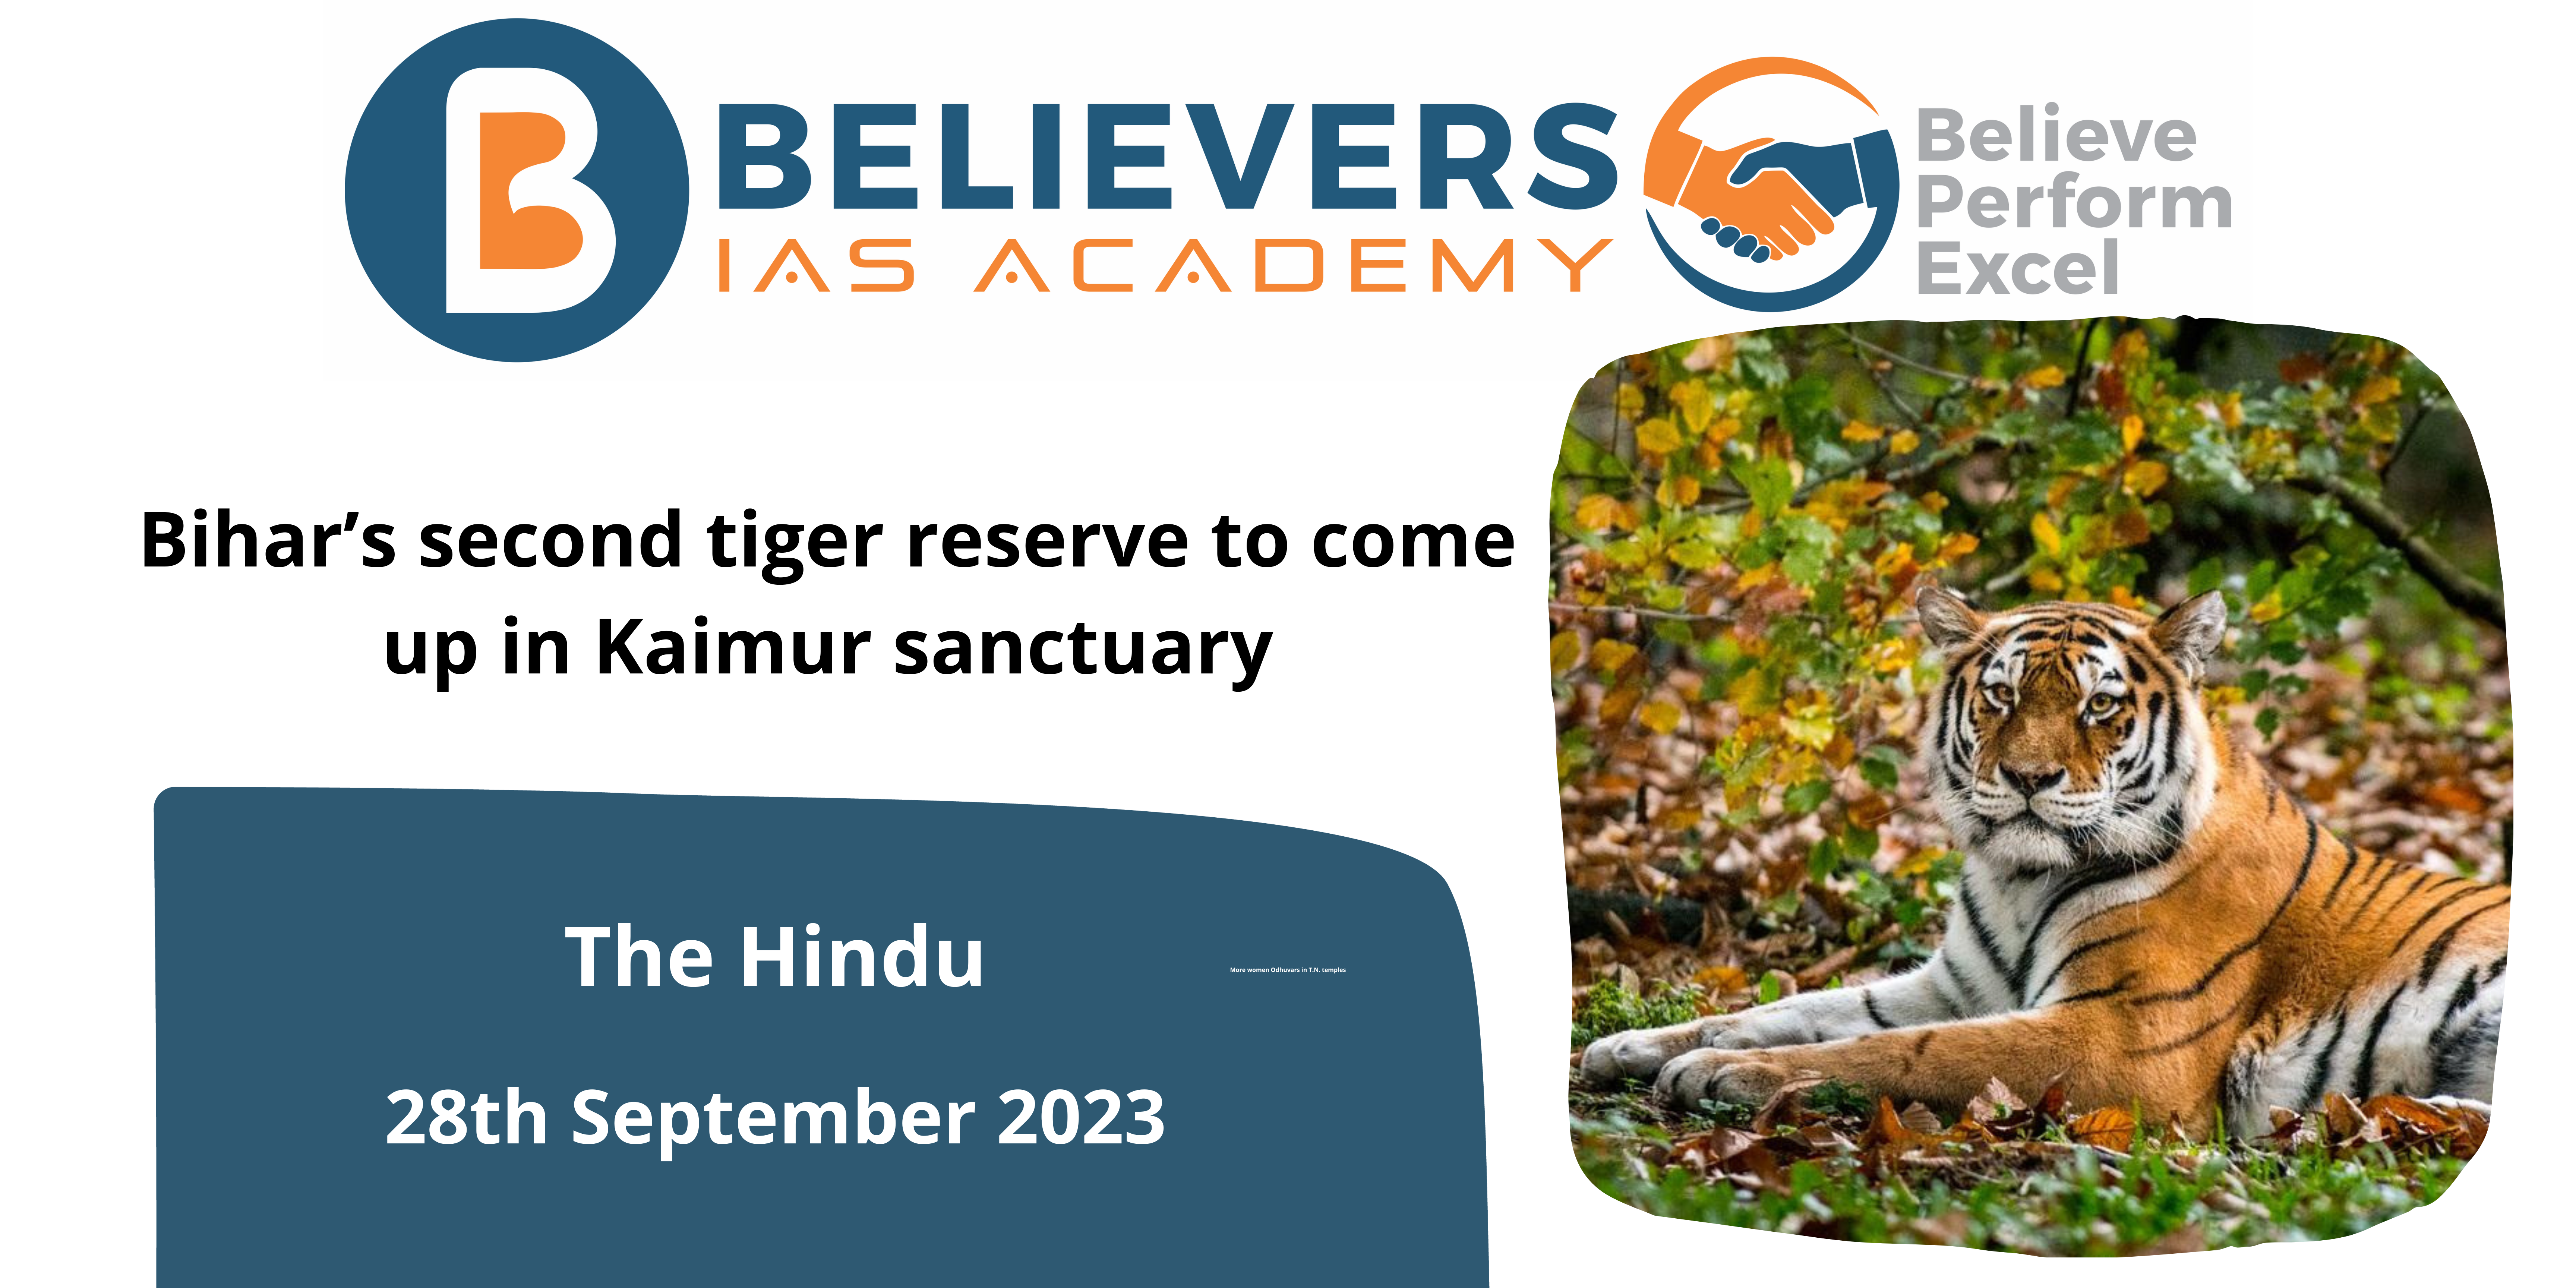 Bihar’s second tiger reserve to come up in Kaimur sanctuary